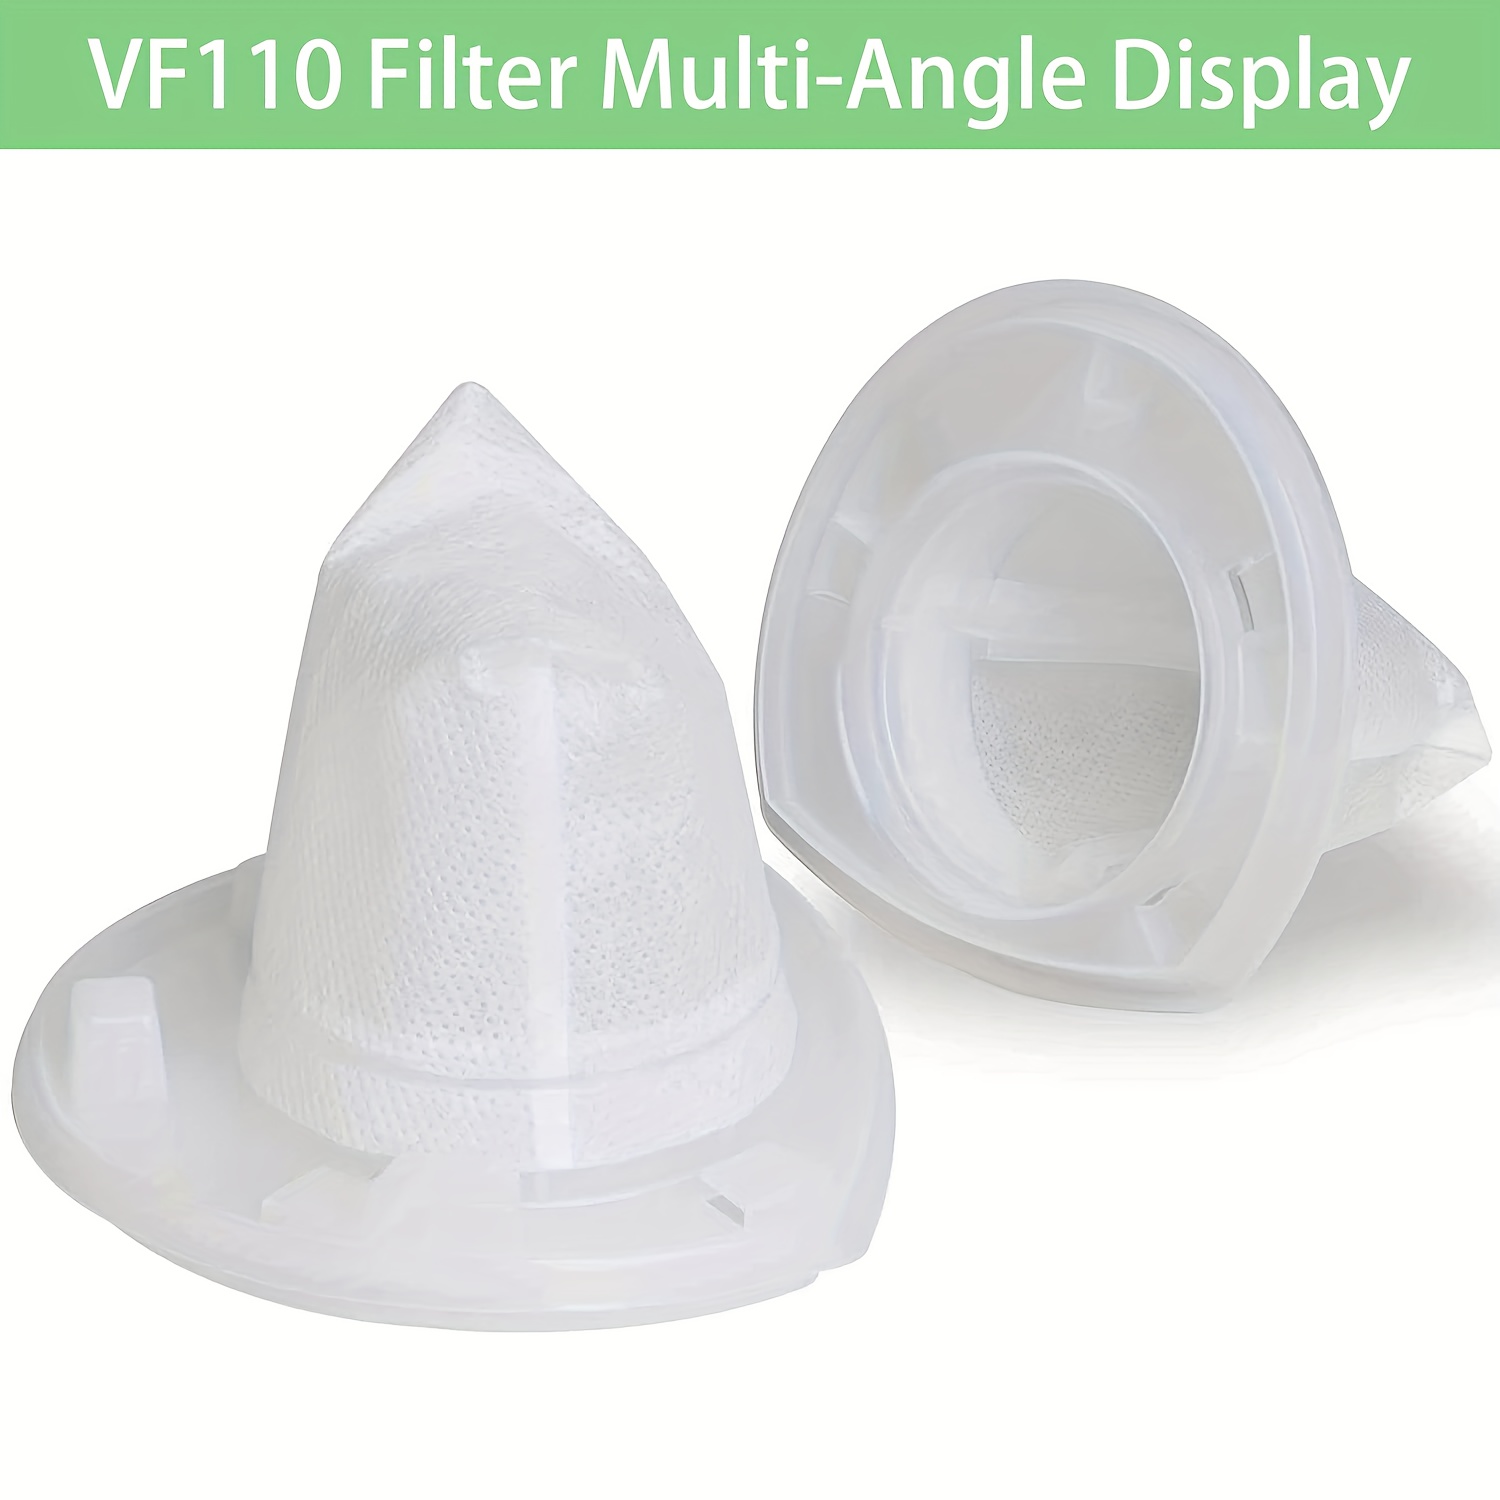 Filter Replacement for Black & Decker VF110 CHV1210 CHV1410